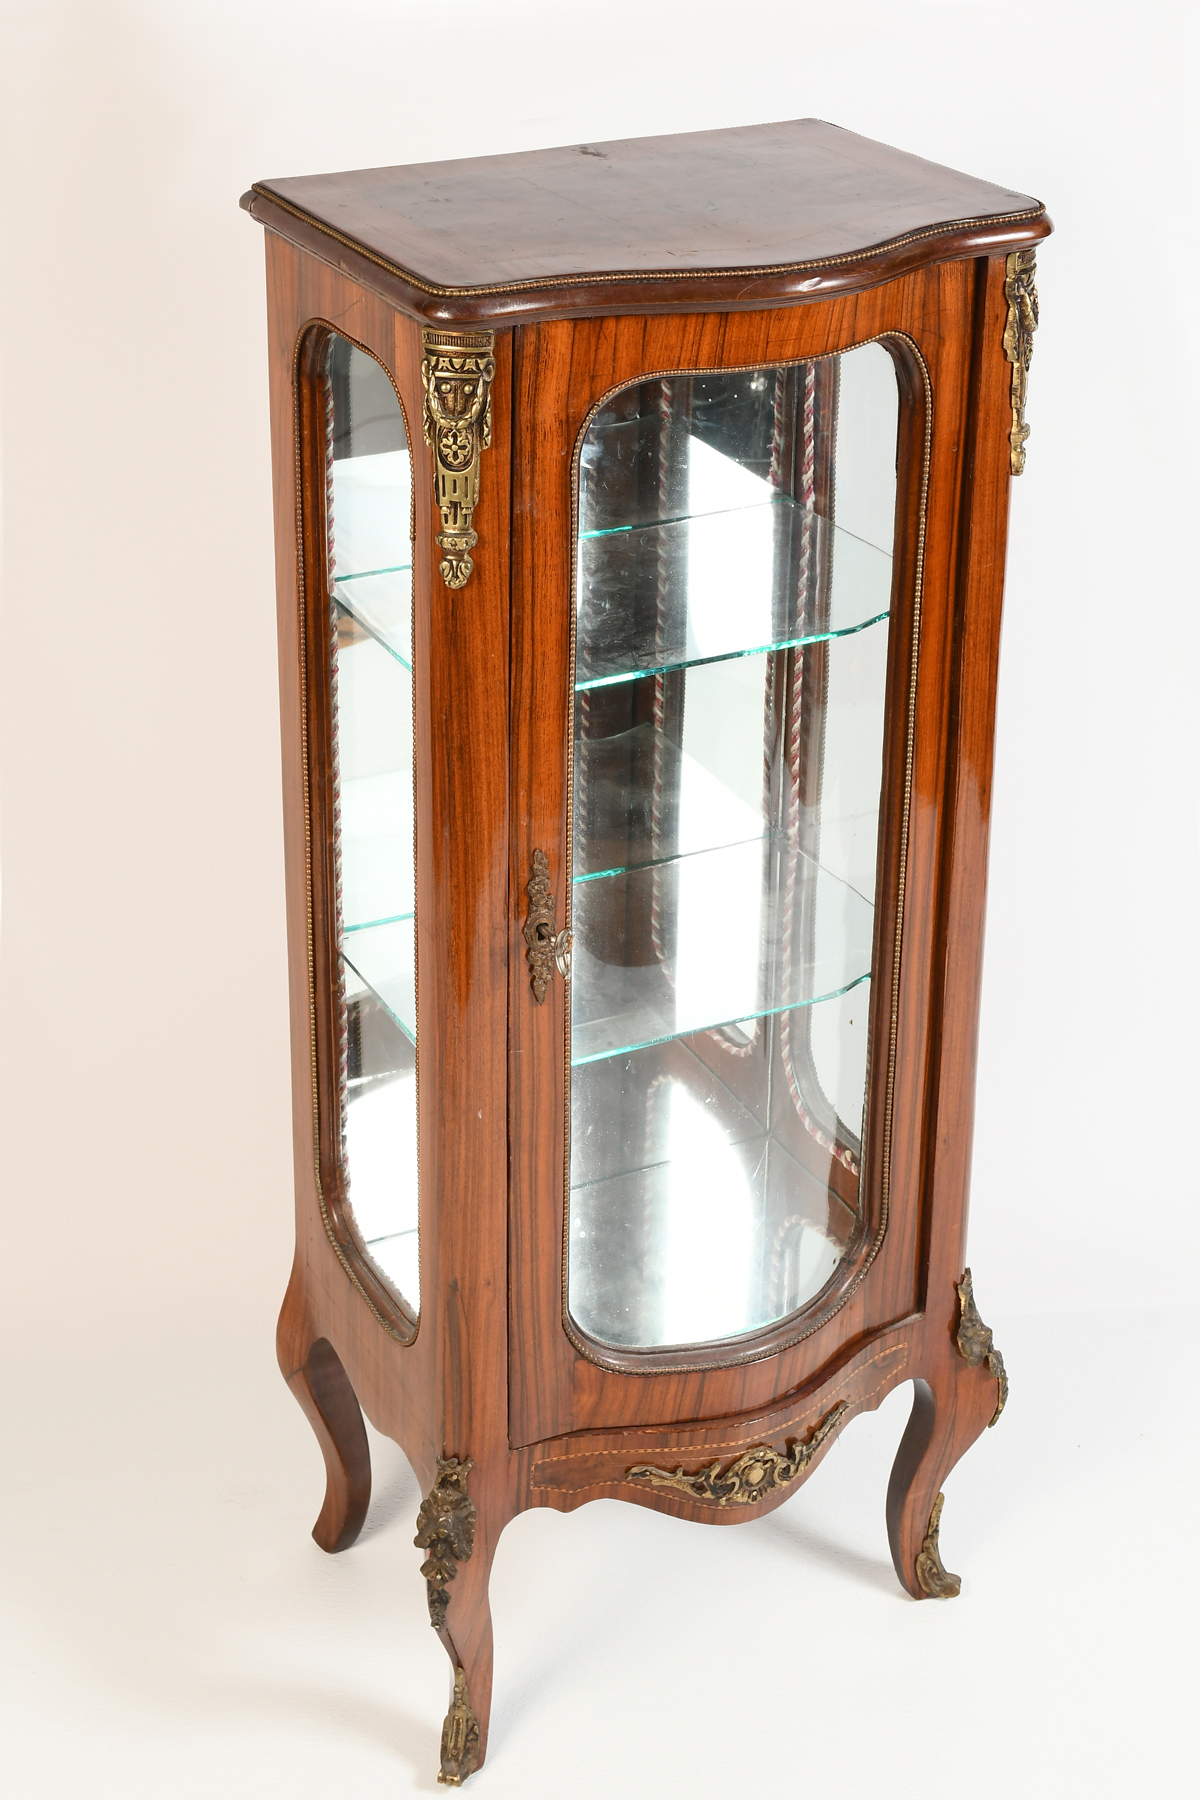 FRENCH METAL MOUNTED VITRINE: With